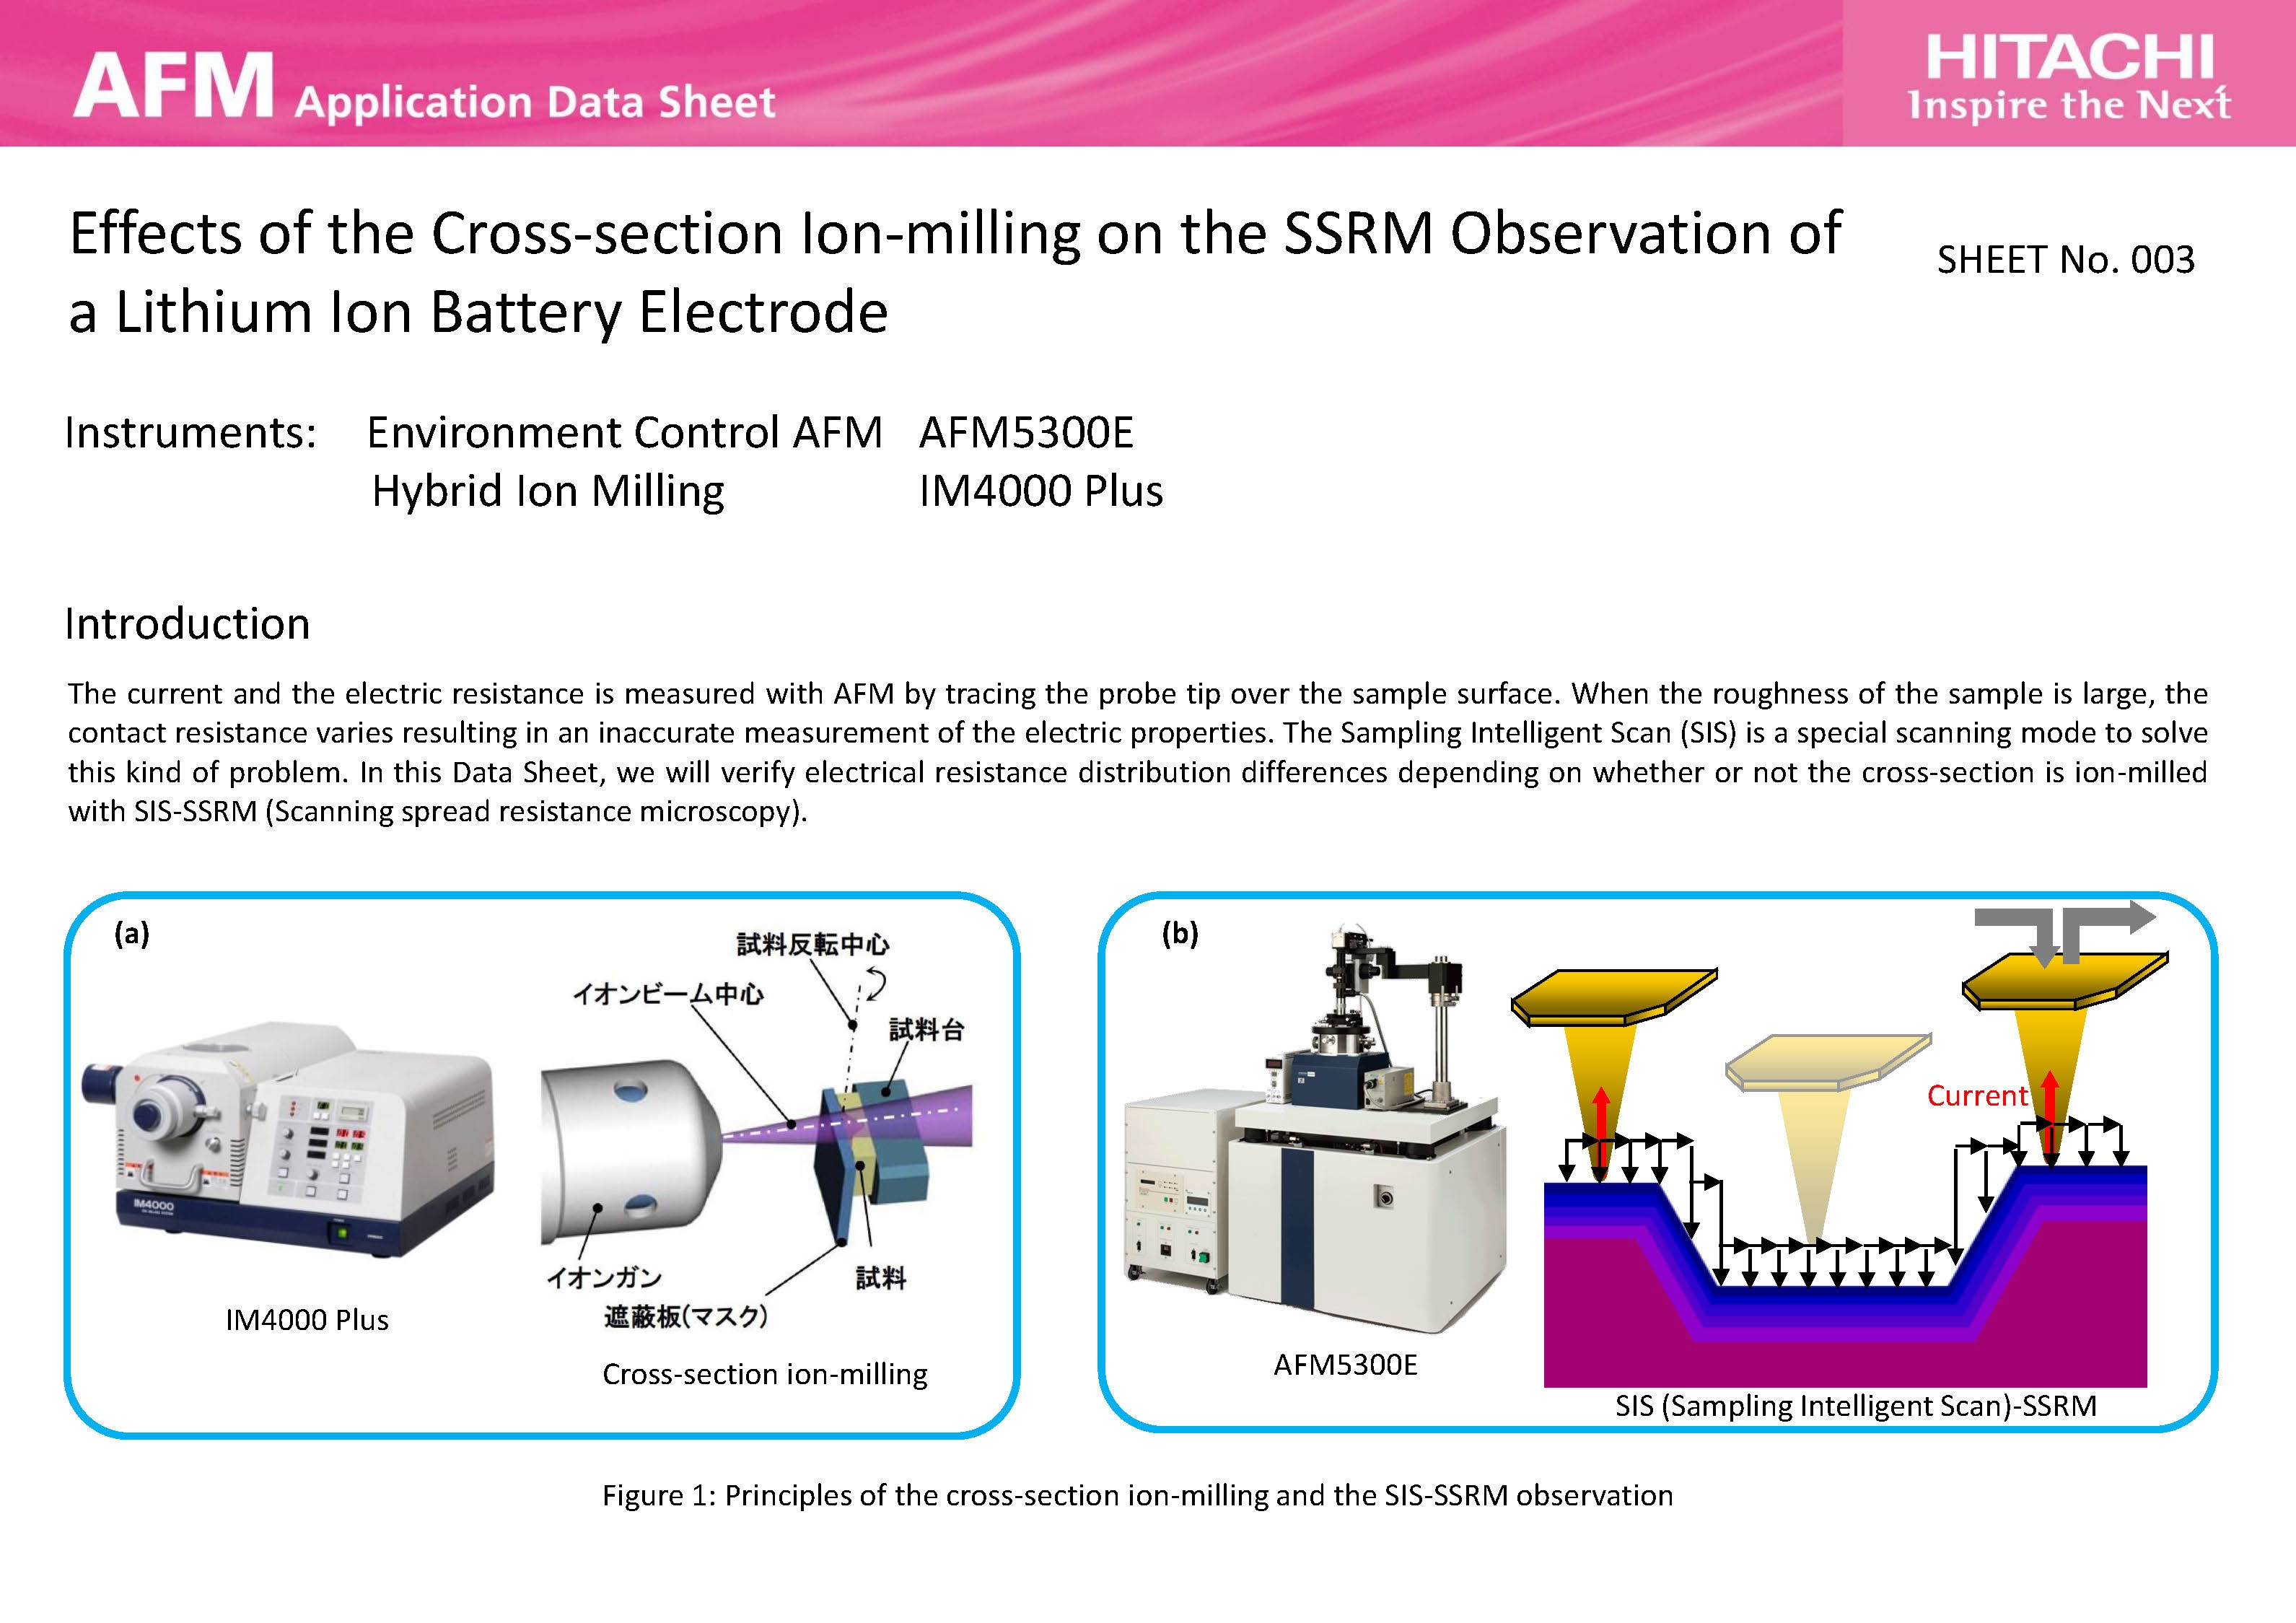 Effects of the Cross-section Ion-milling on the SSRM Observation of a Lithium Ion Battery Electrode